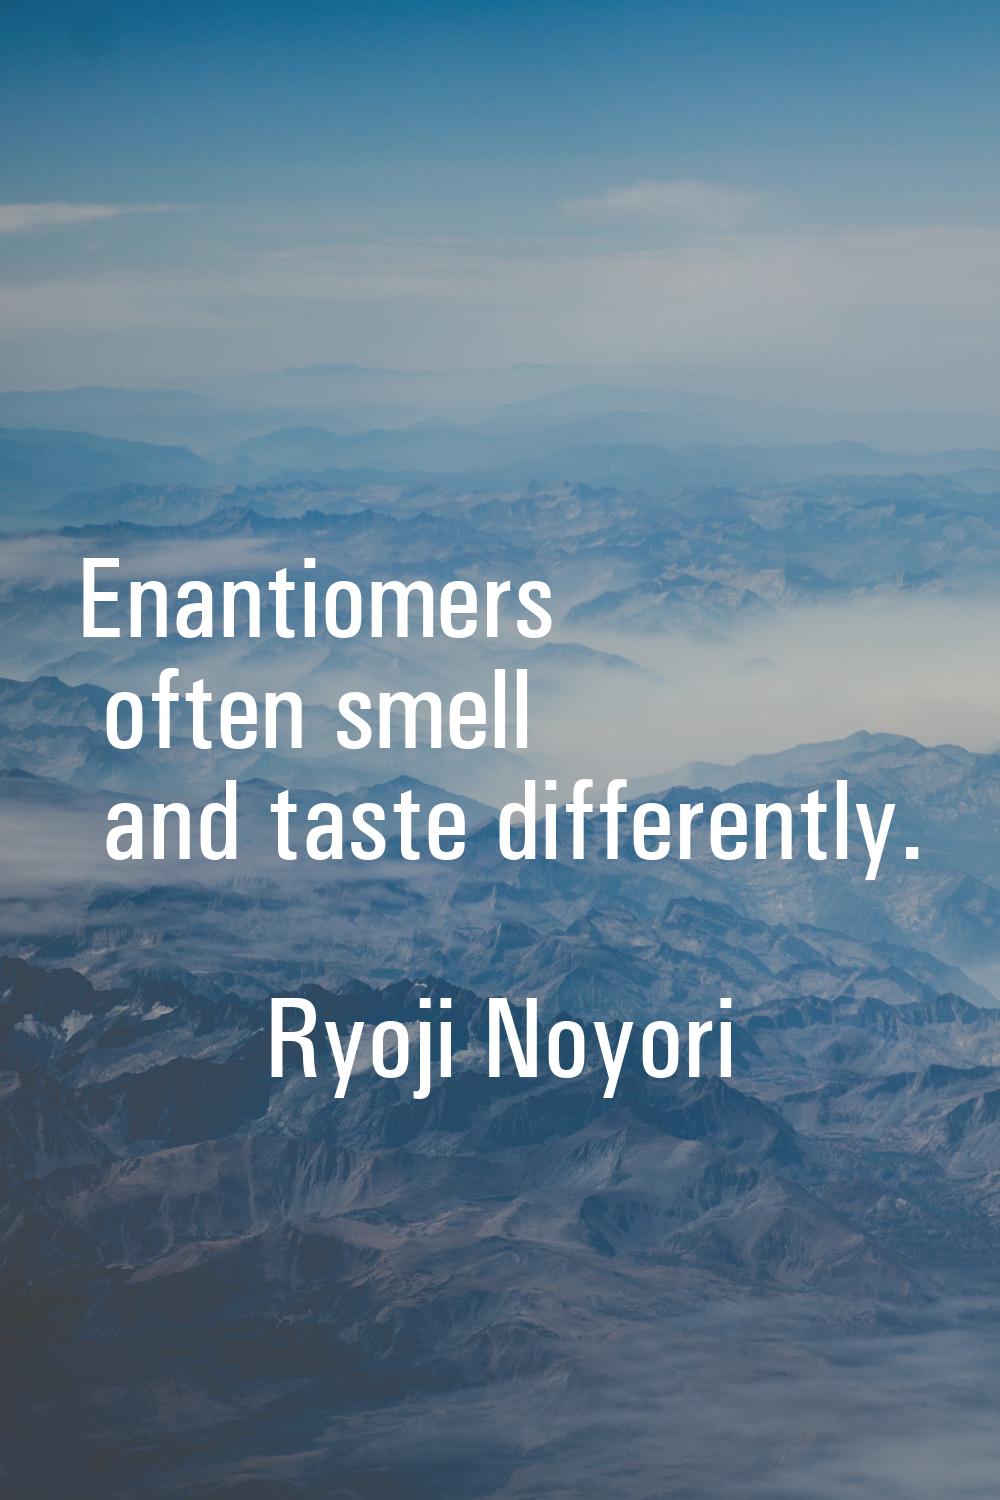 Enantiomers often smell and taste differently.